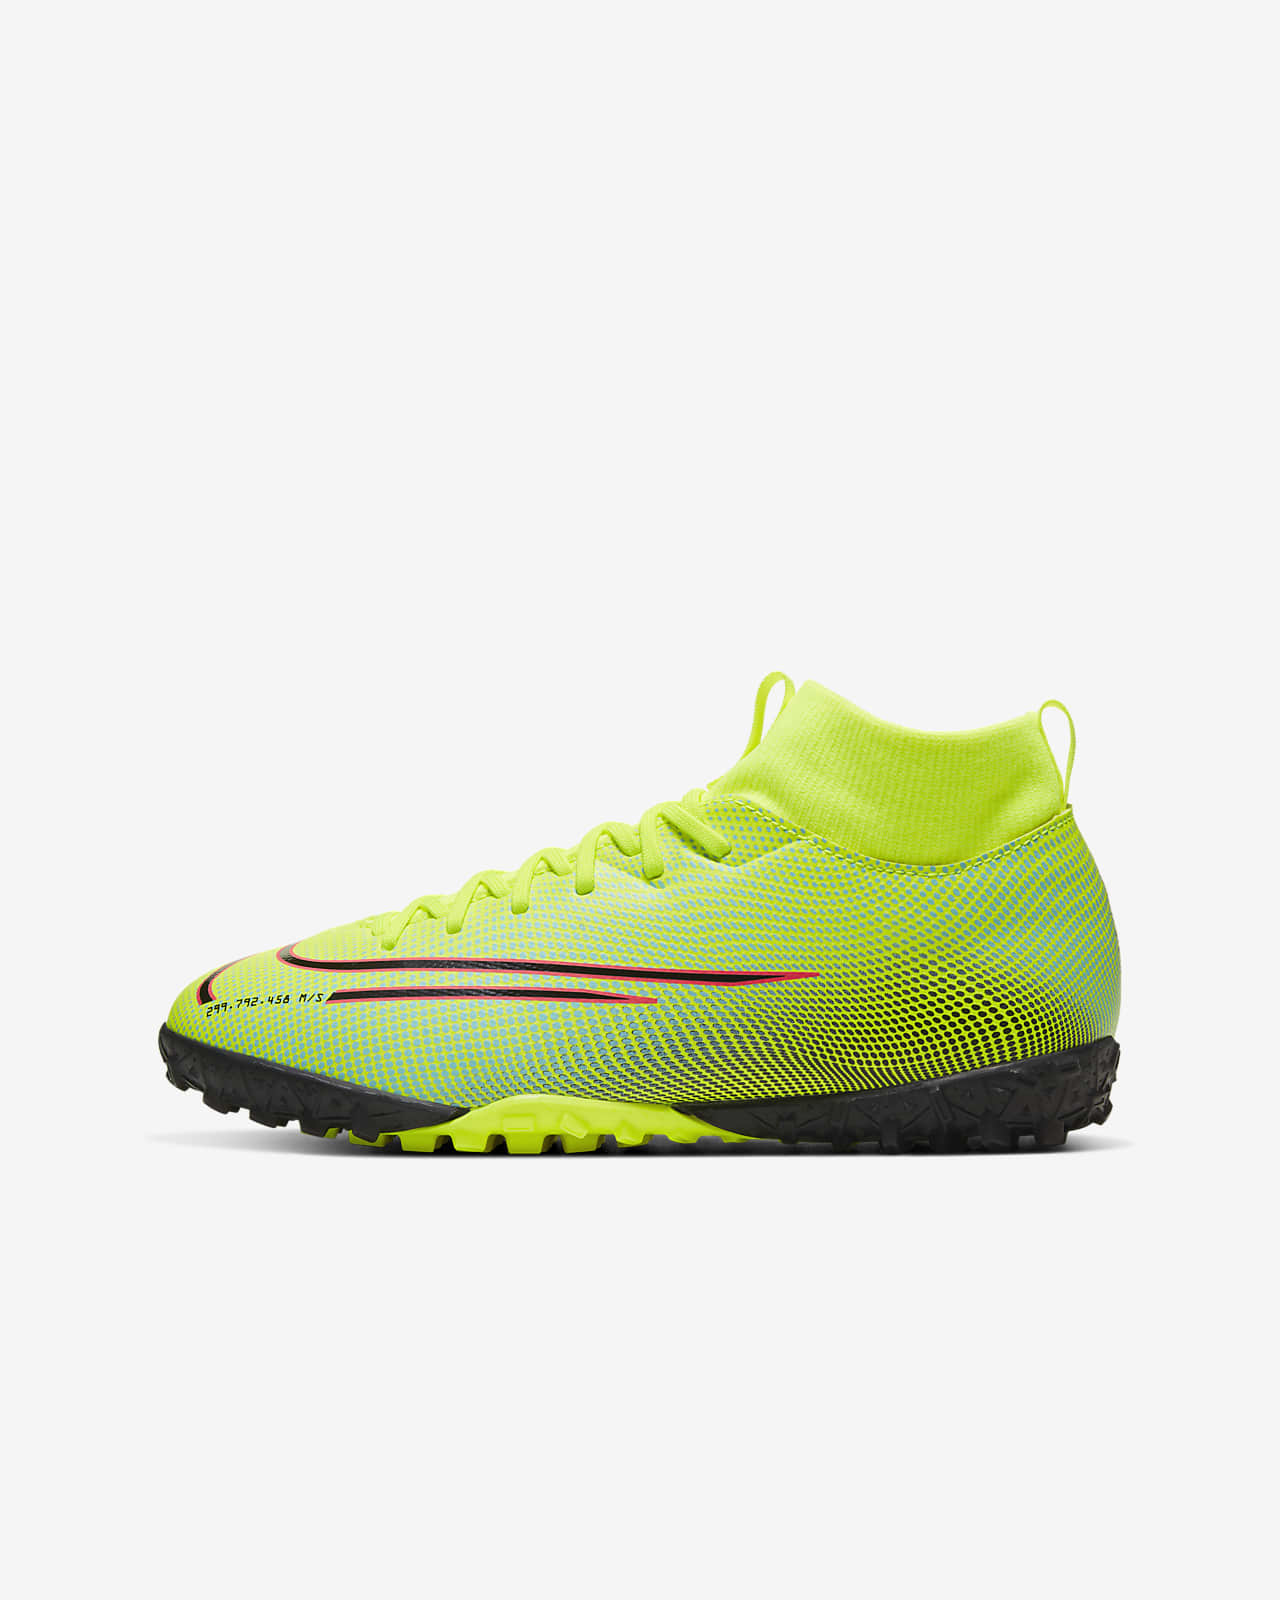 nike magista turf soccer shoes